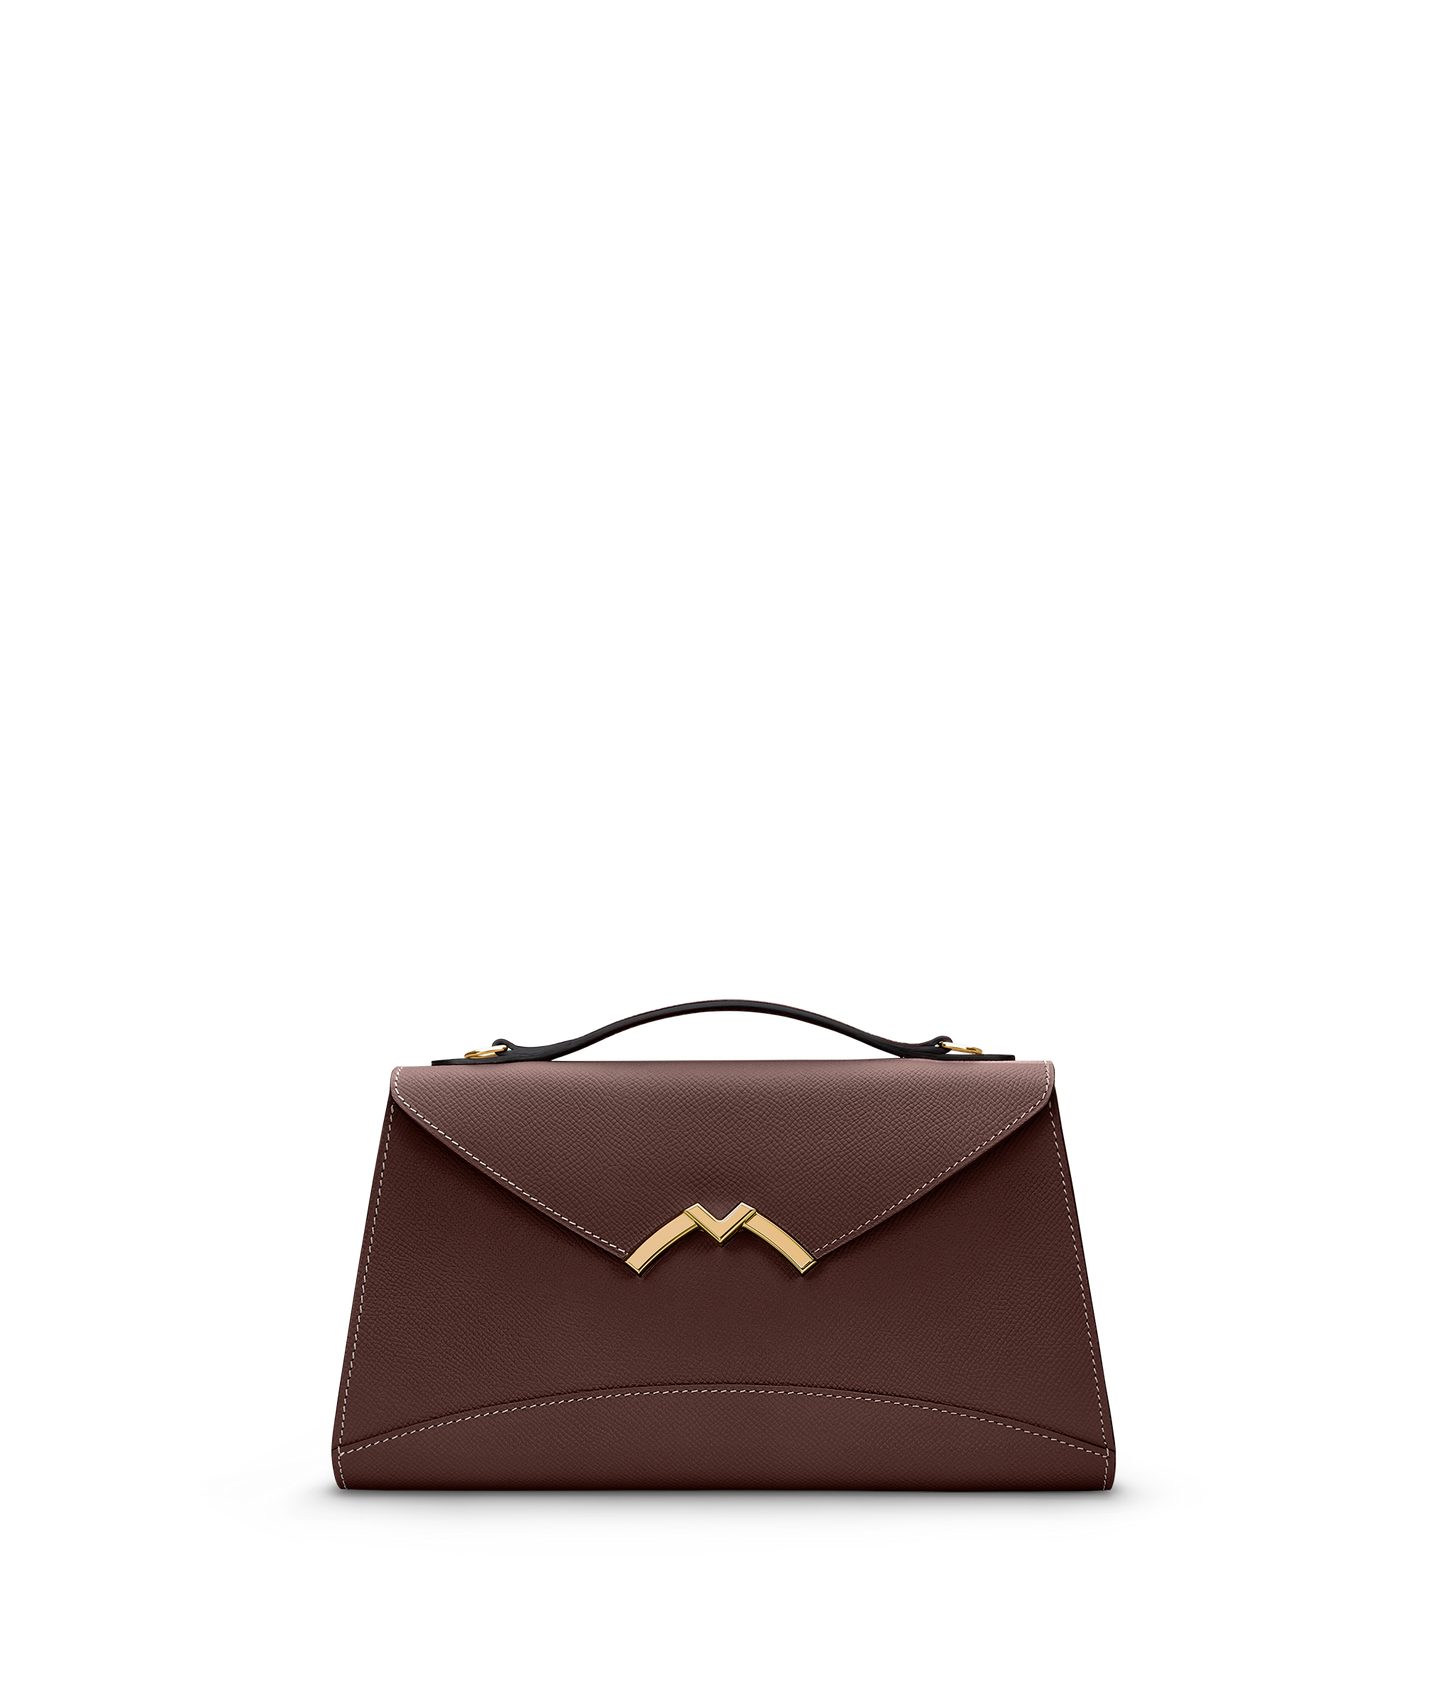 MOYNAT on X: A closer look at the Gabrielle. #moynat